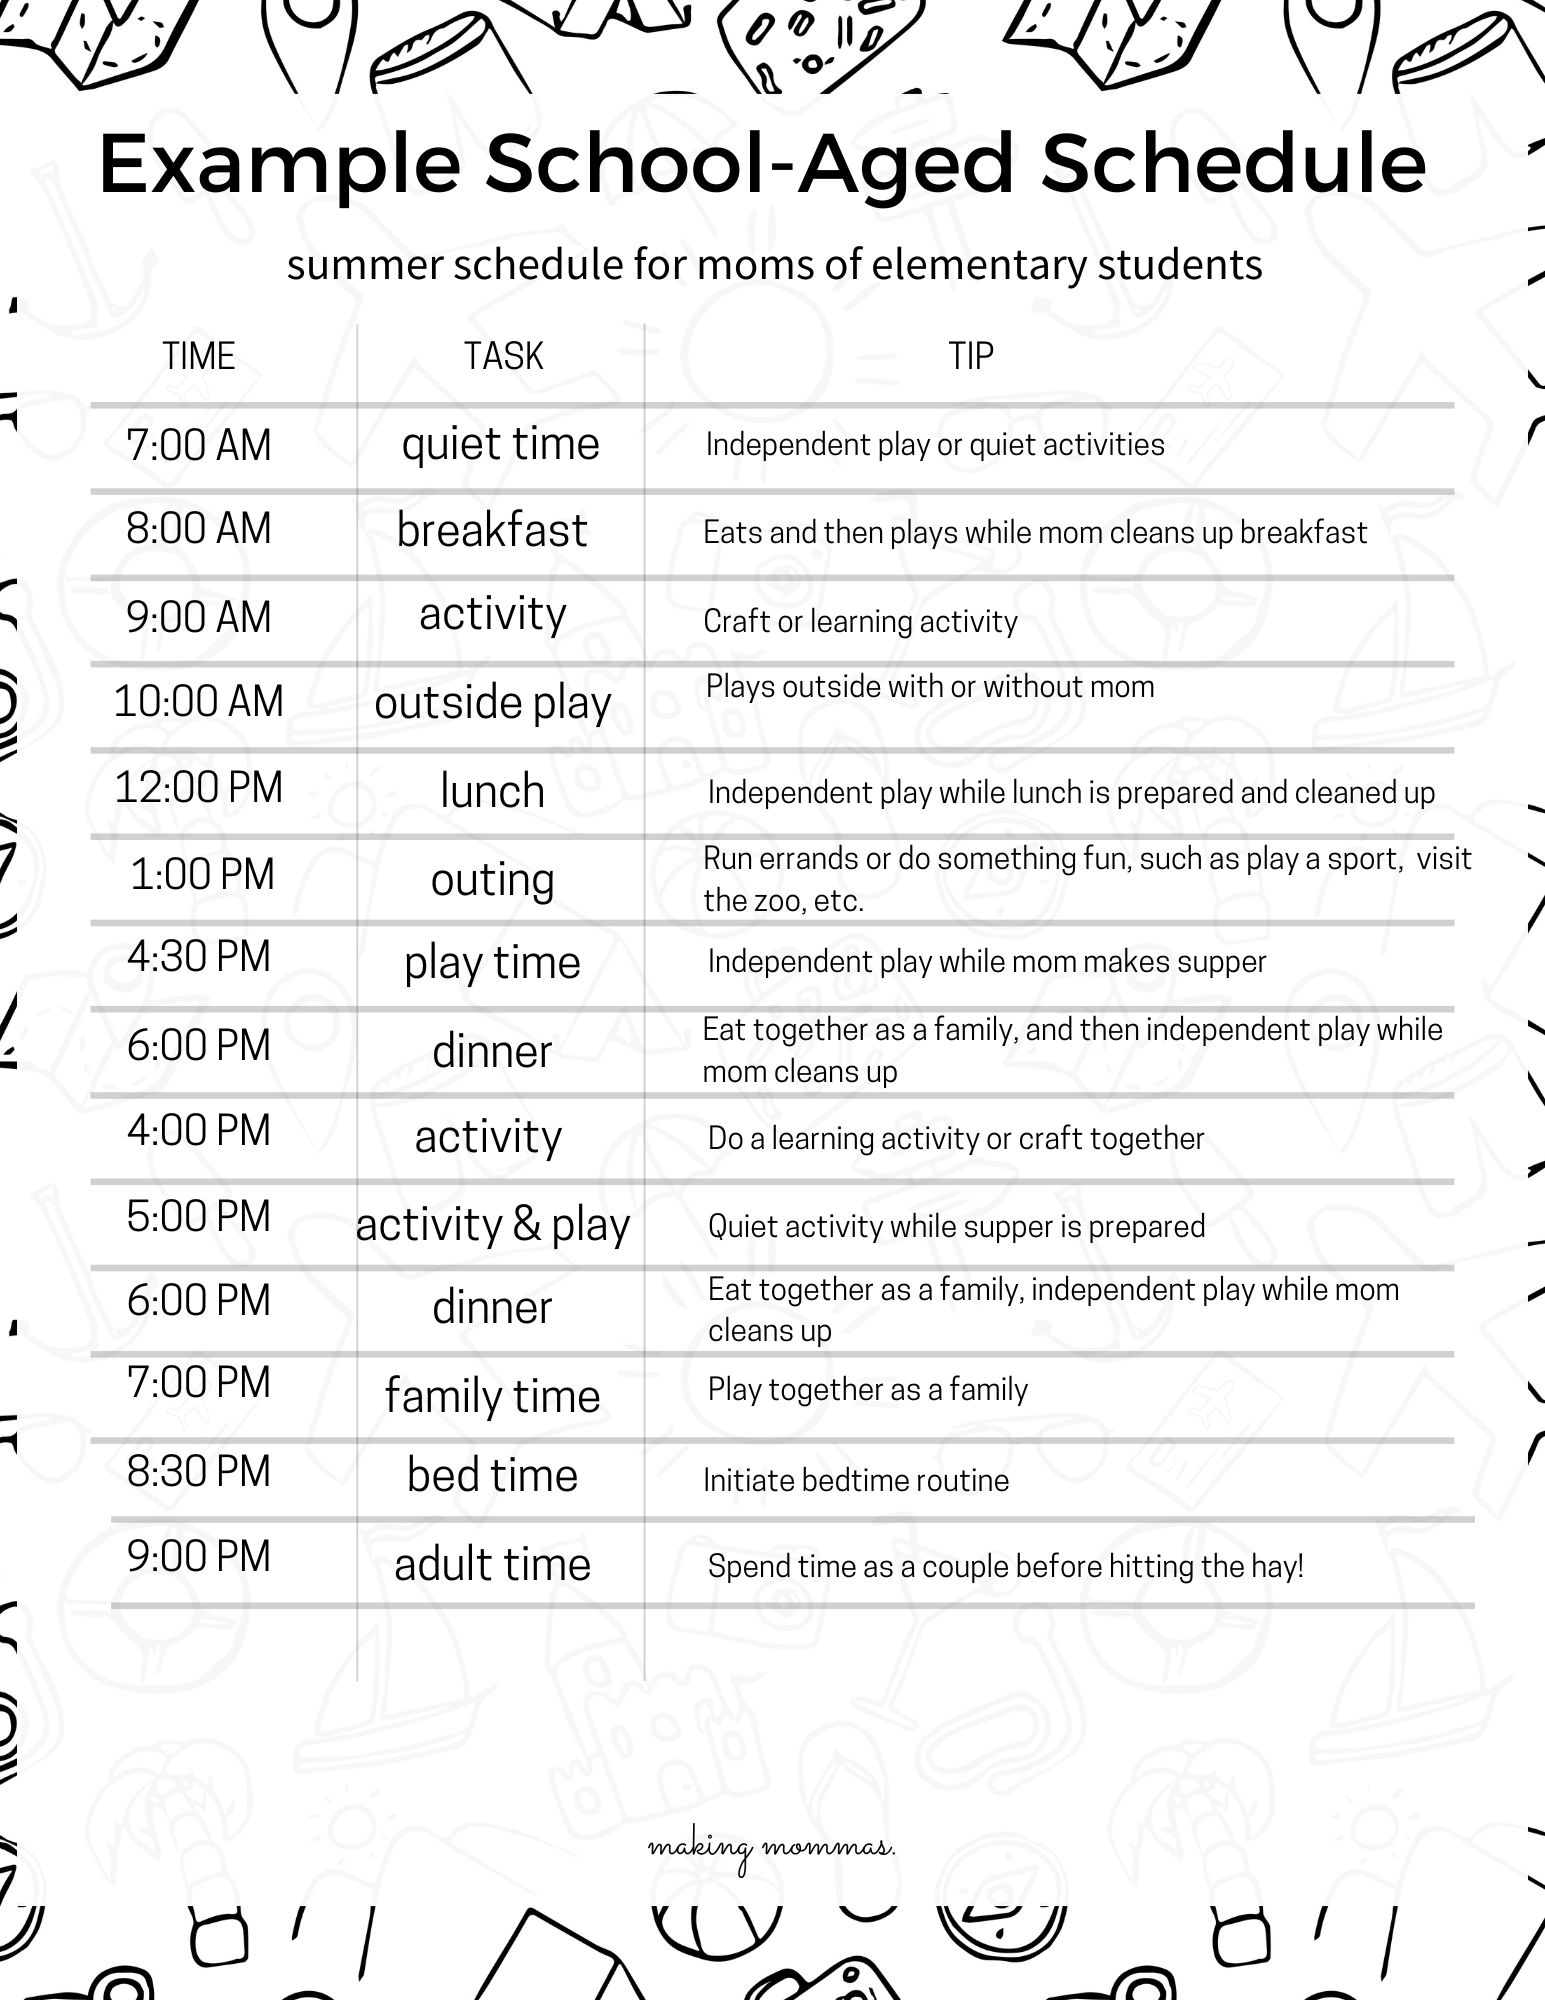 summer schedule for elementary students